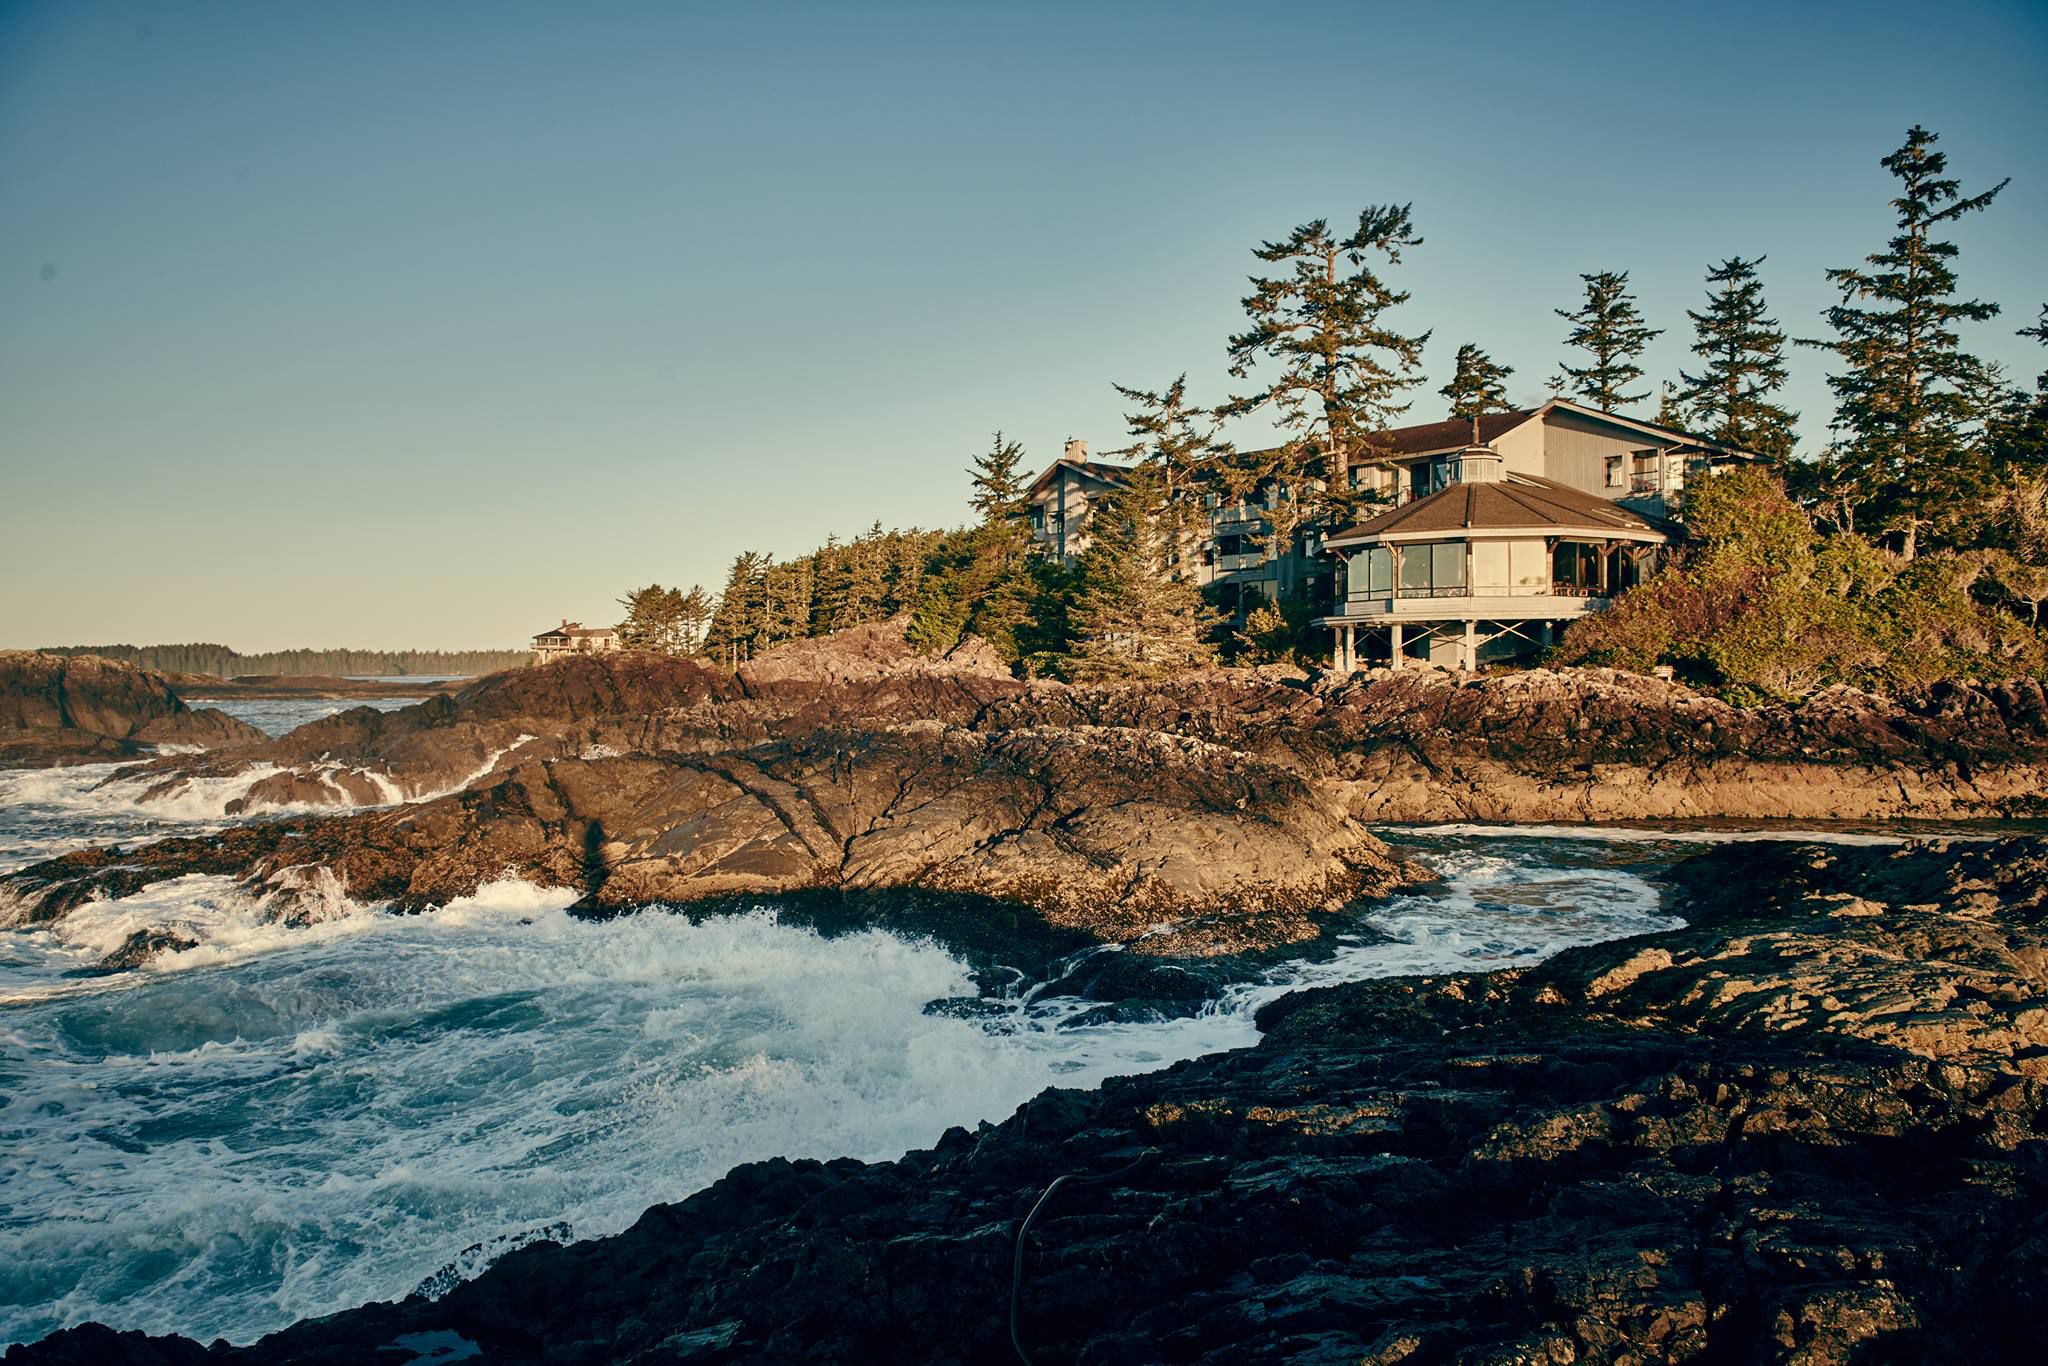 The Wickaninnish Inn set on a cliff overlooking the beach in Tofino, Canada.